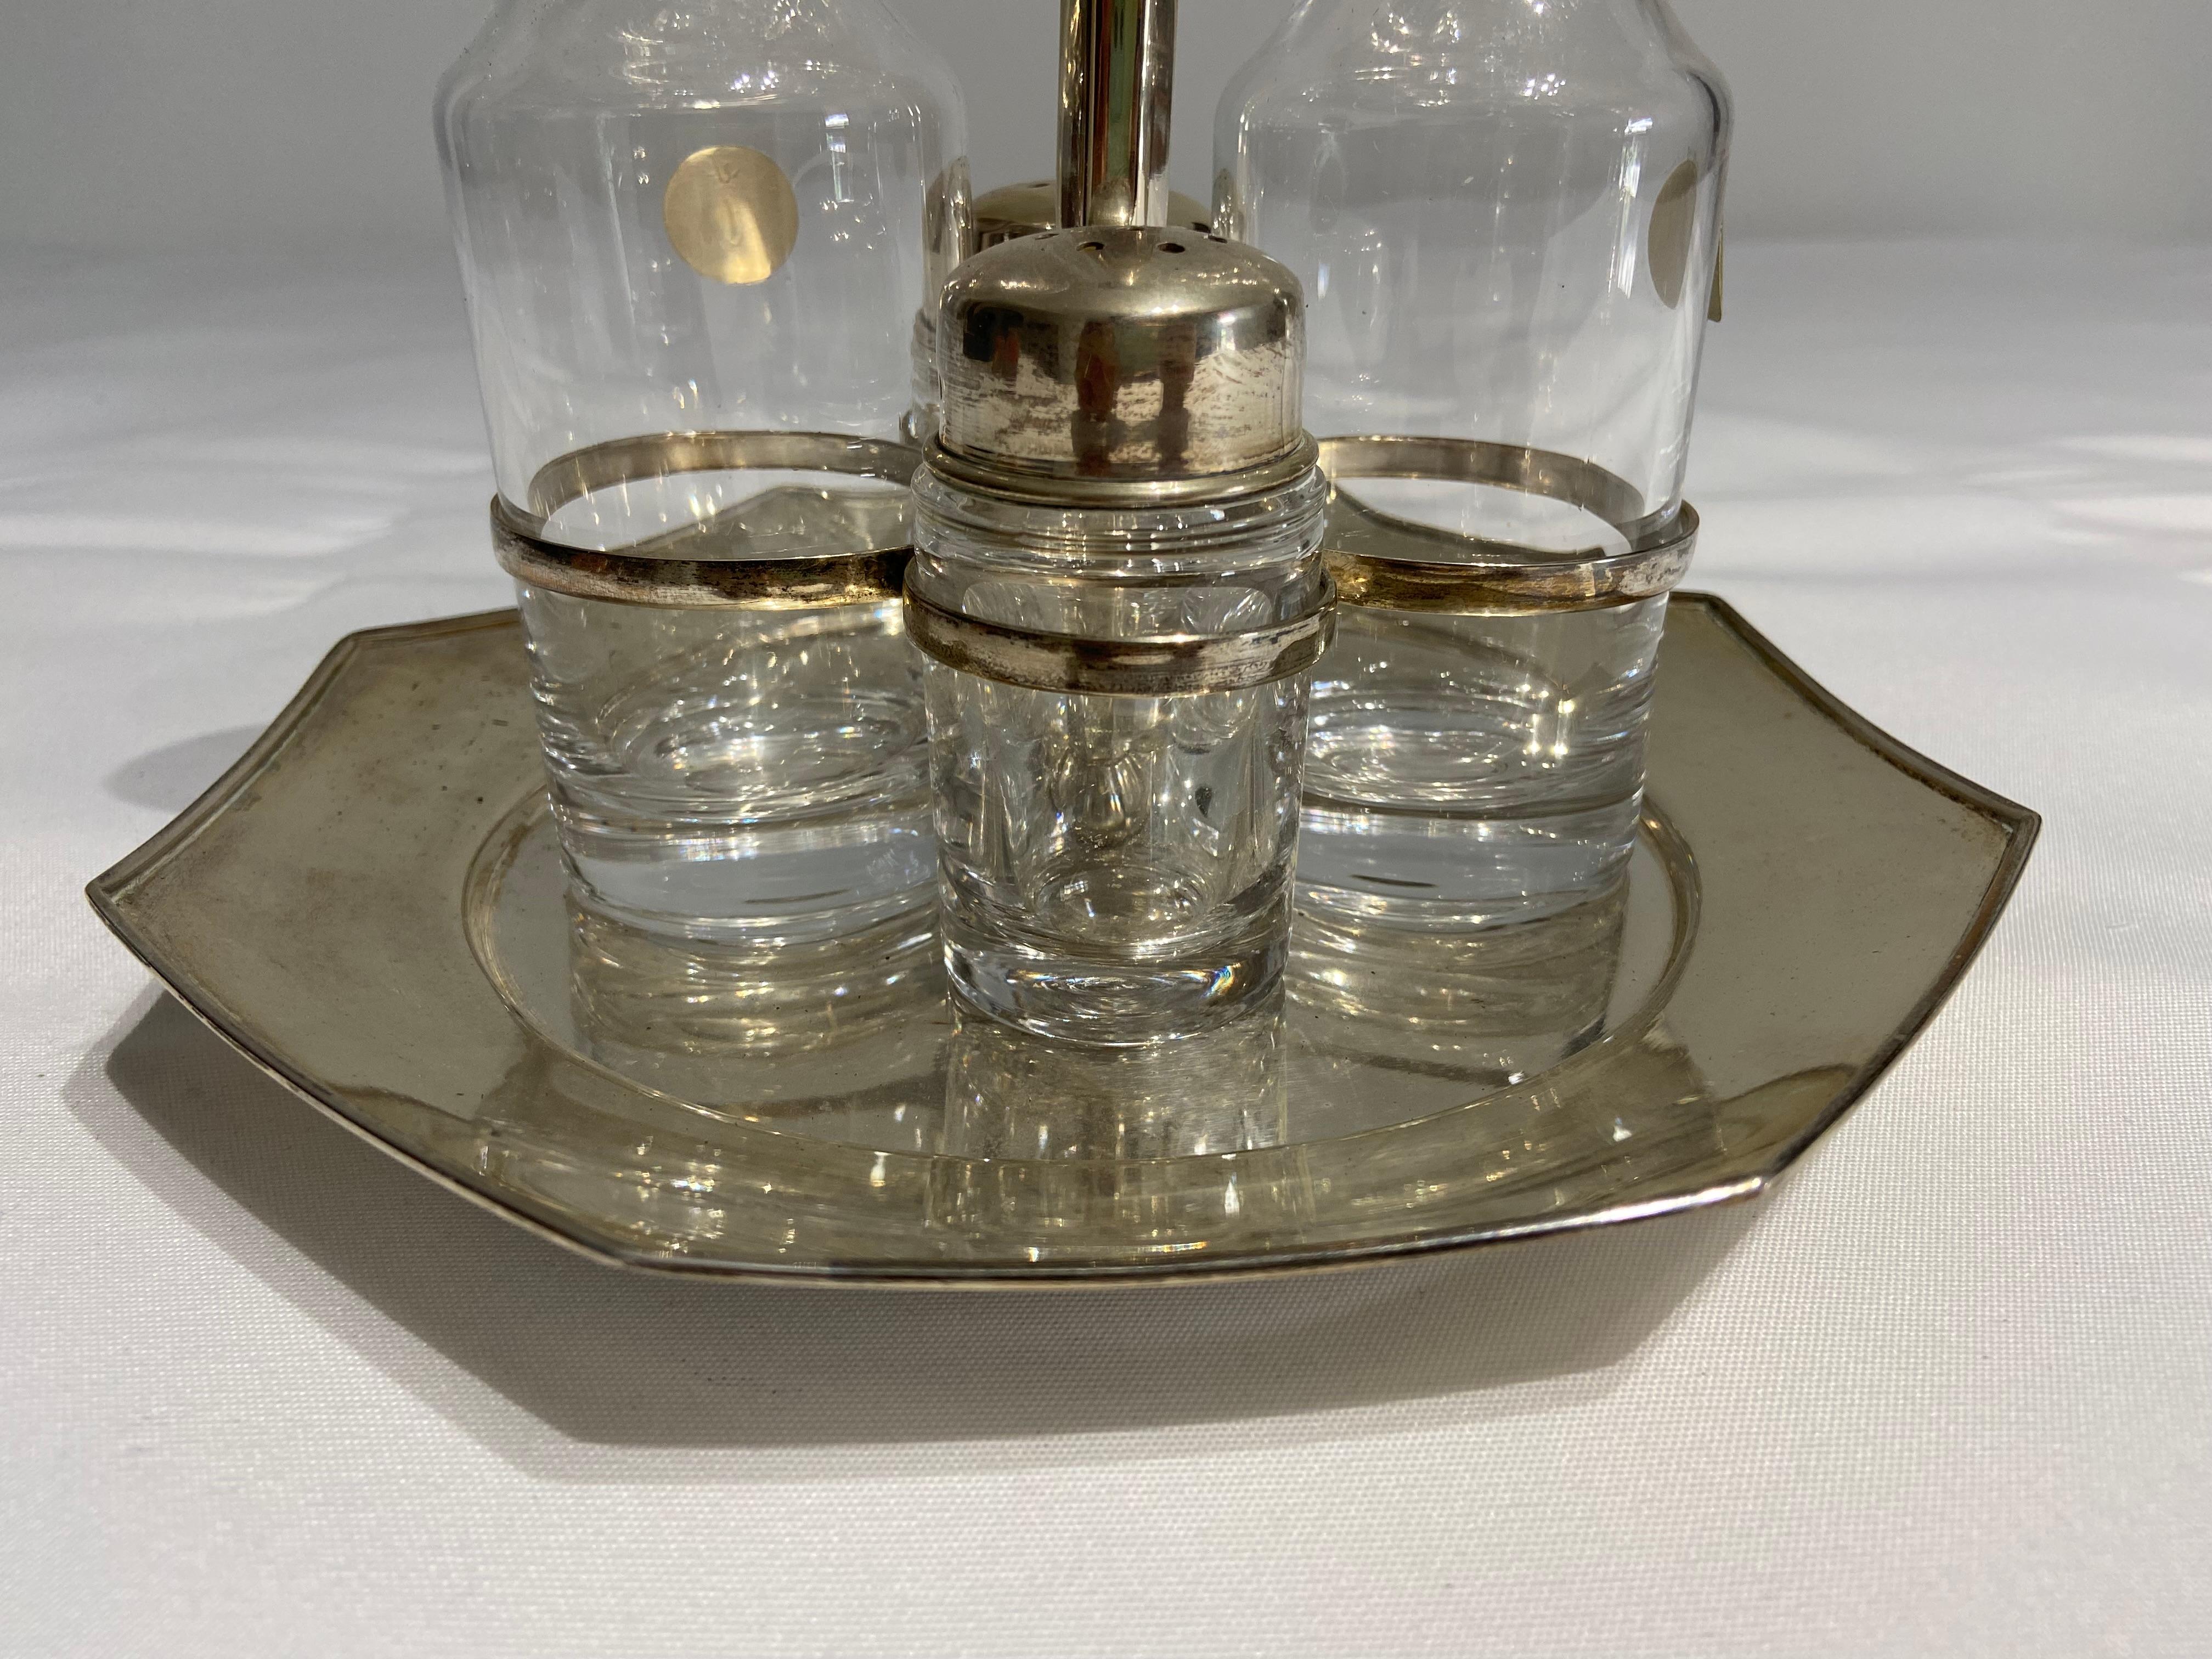 SILVER 800 oil / vinegar / salt / pepper set, menage.
All in SILVER 800. Lead crystal.
Gross weight 1145.00 grams (net weight of silver alone 800 303.00 grams).
Measure 20 cm by 26 cm.
Regularly stamped with state marks.
Object that will give